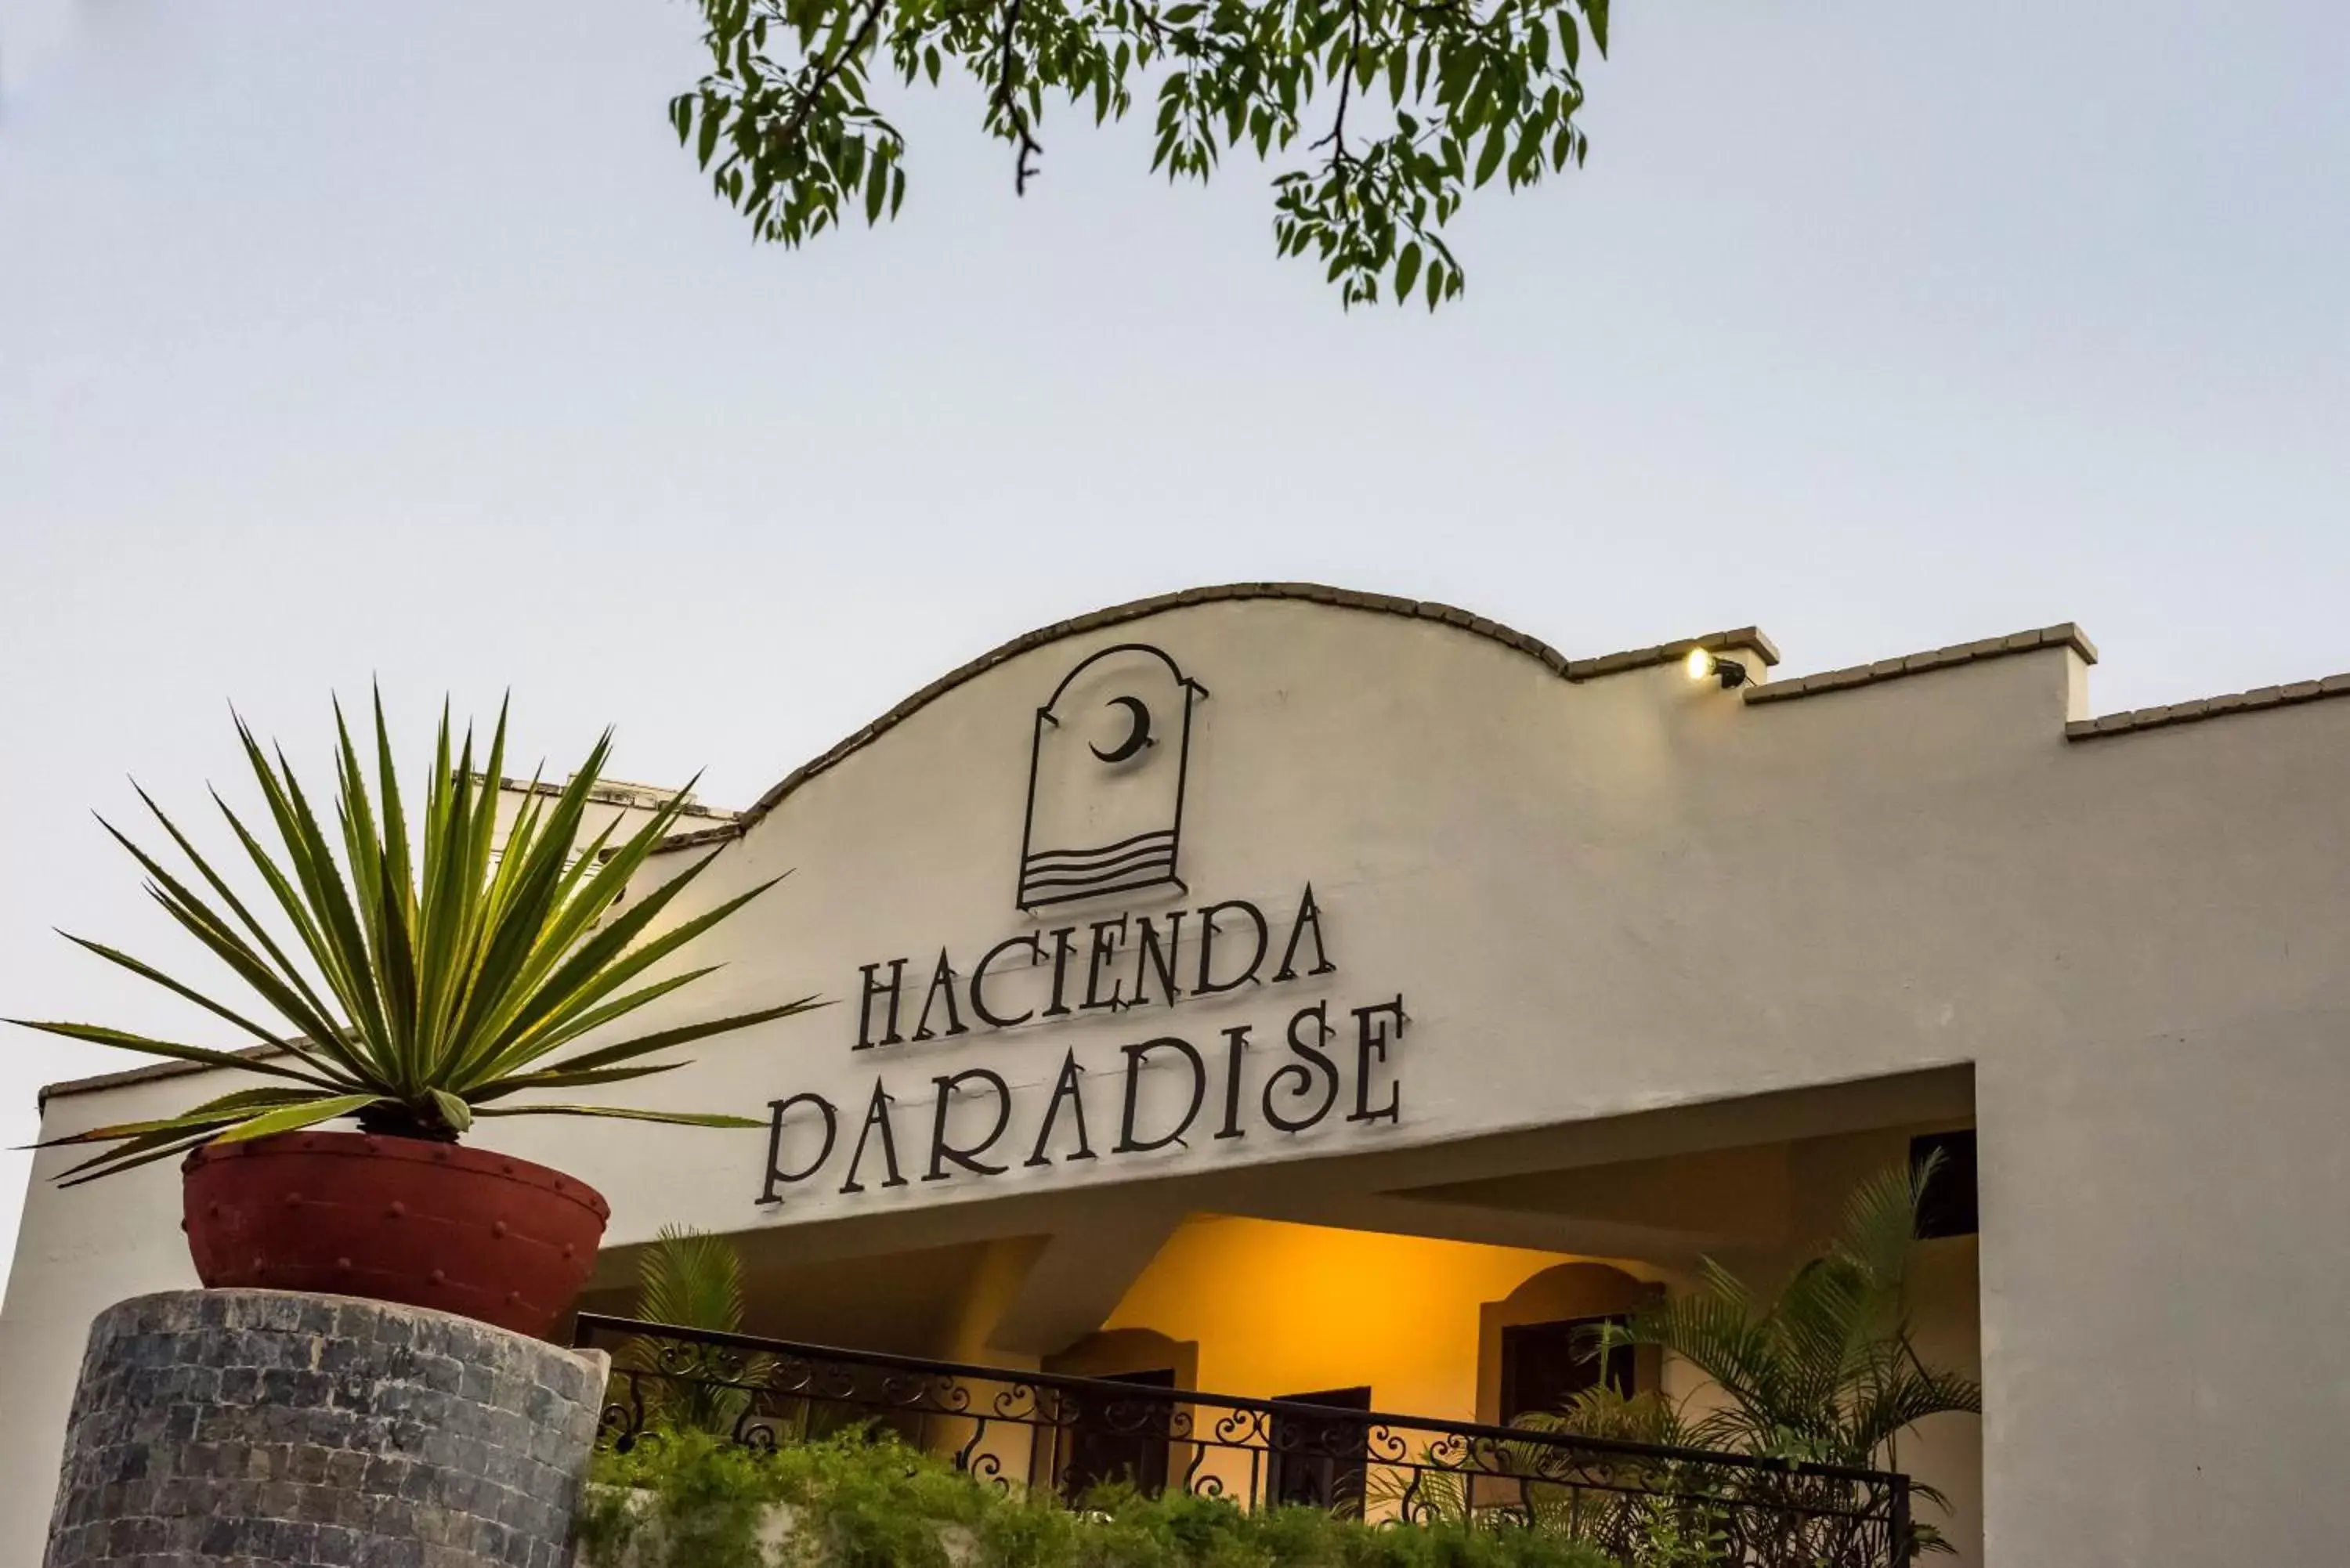 Property logo or sign in Hacienda Paradise Hotel by BFH